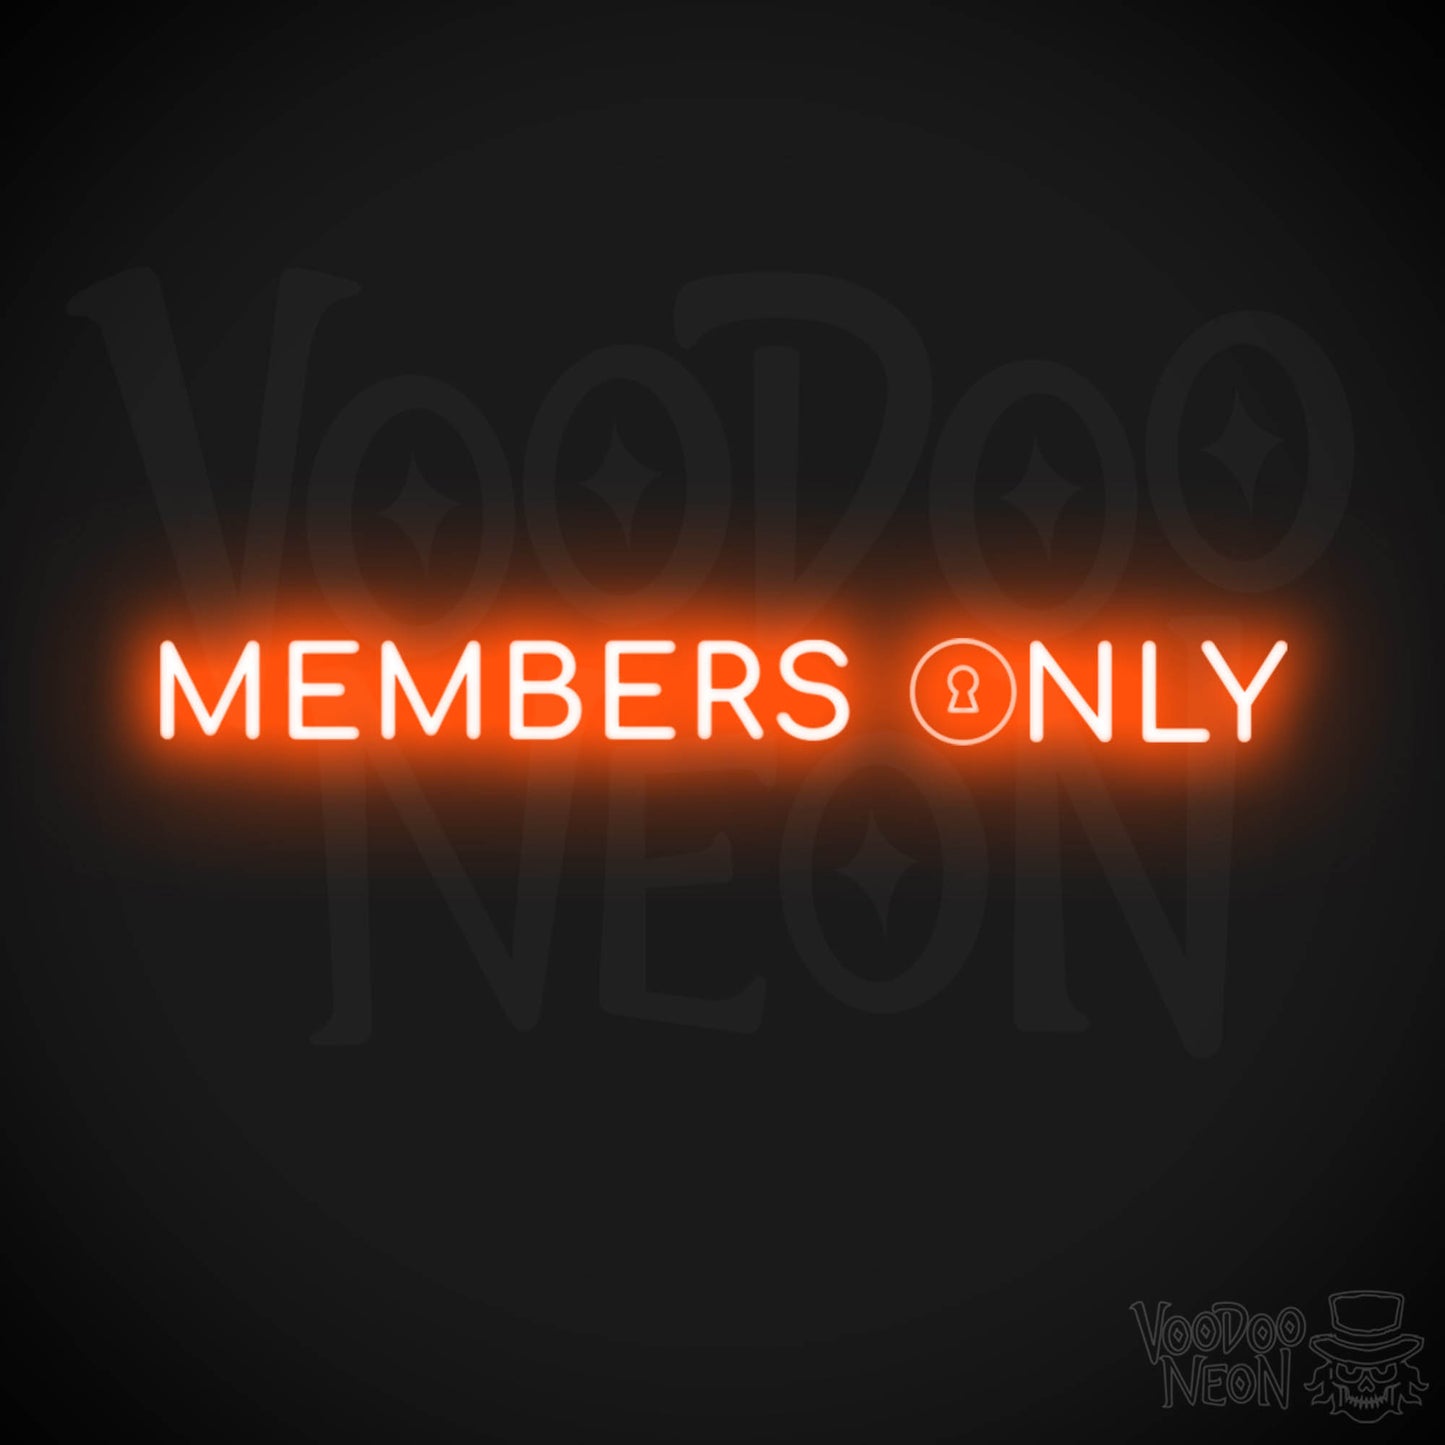 Members Only Neon Sign - Neon Members Only Sign - Color Orange